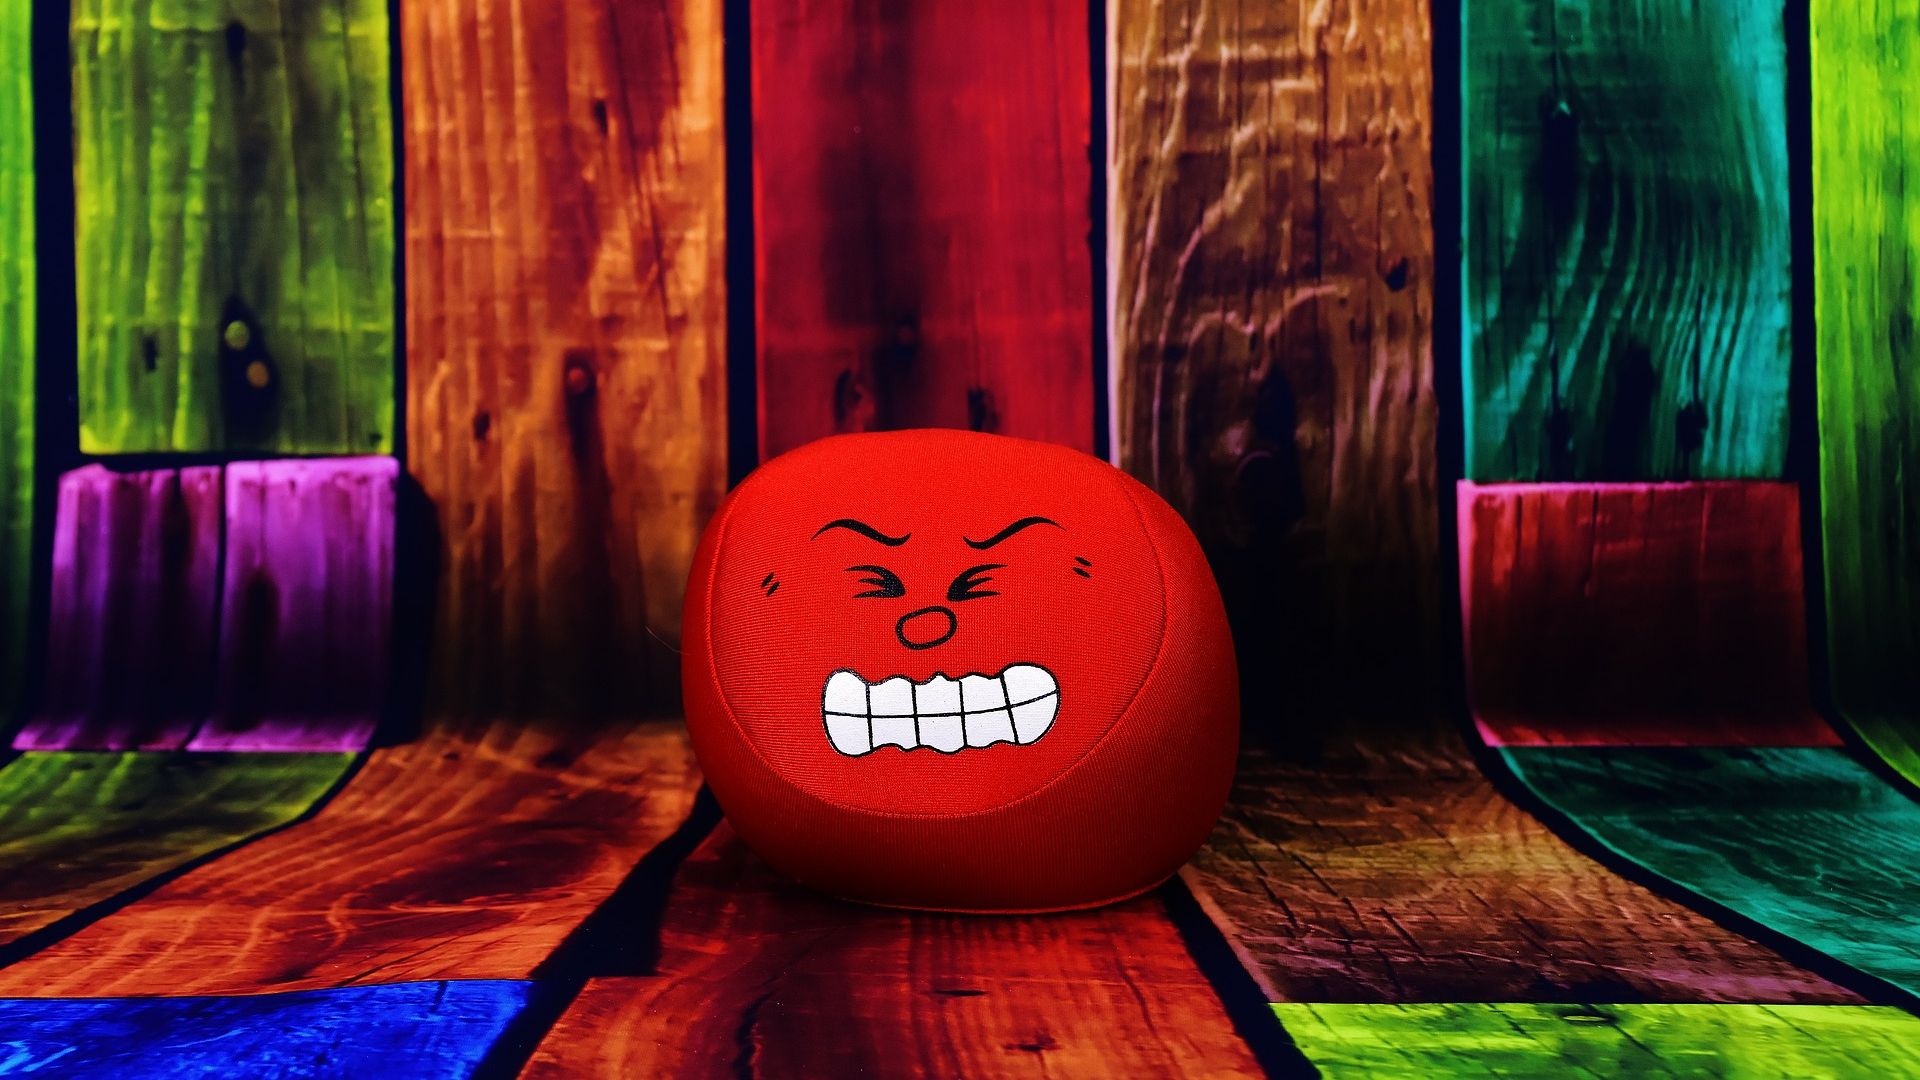 Wallpaper Smiley, angry, red evil